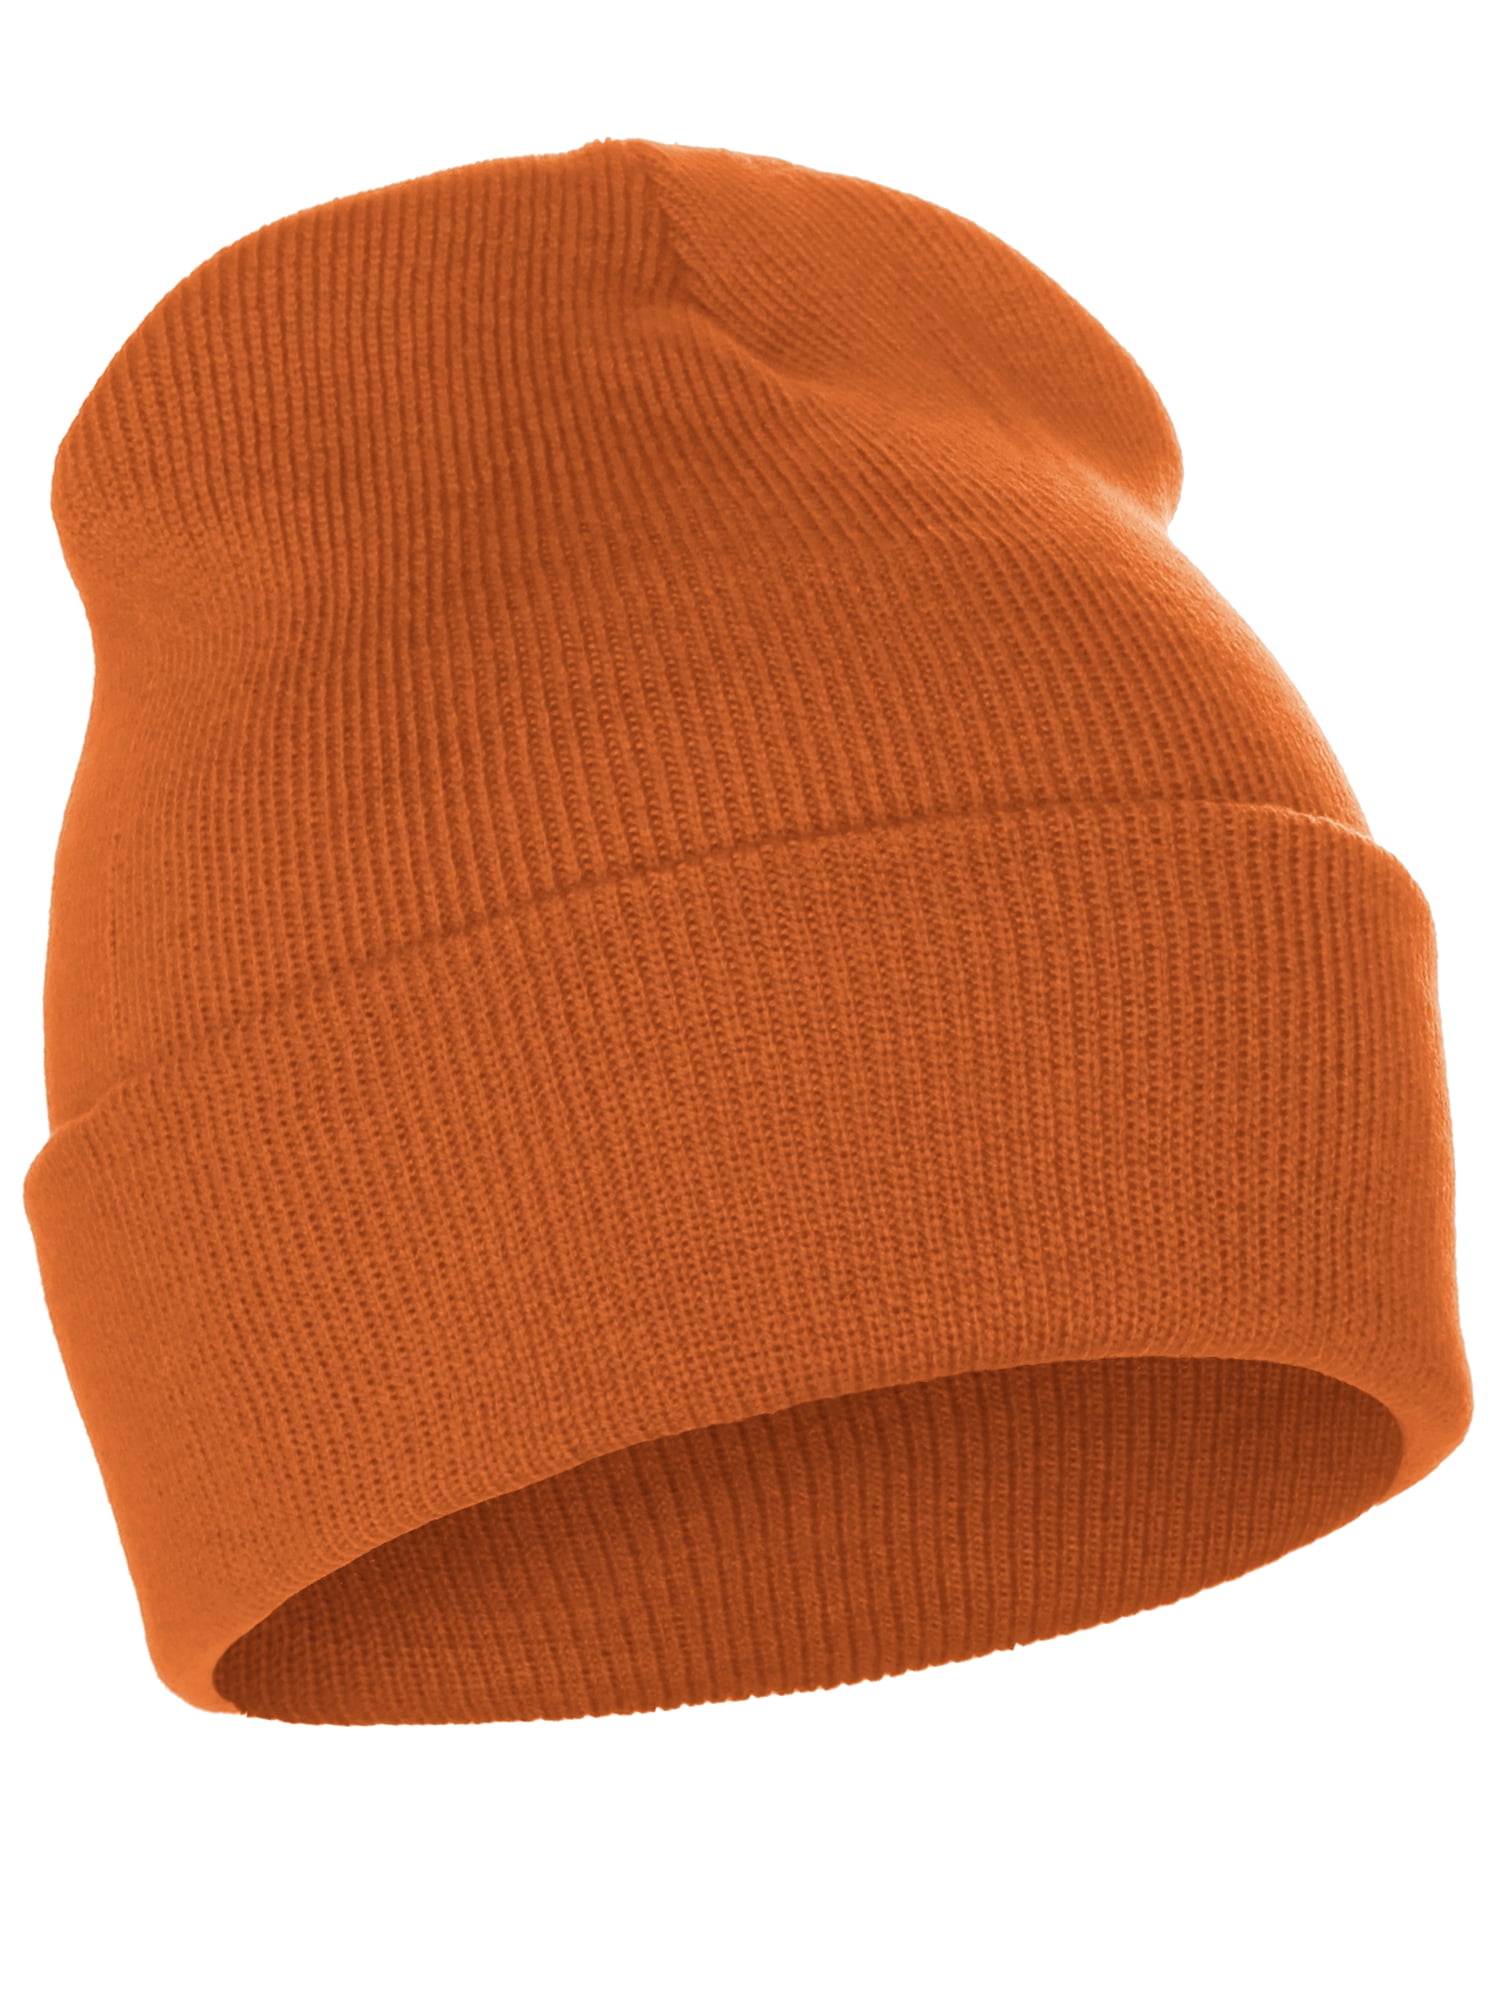 3M Thinsulate Mens Boys Girls Female German Style Insulated Beanie Hats Winter 